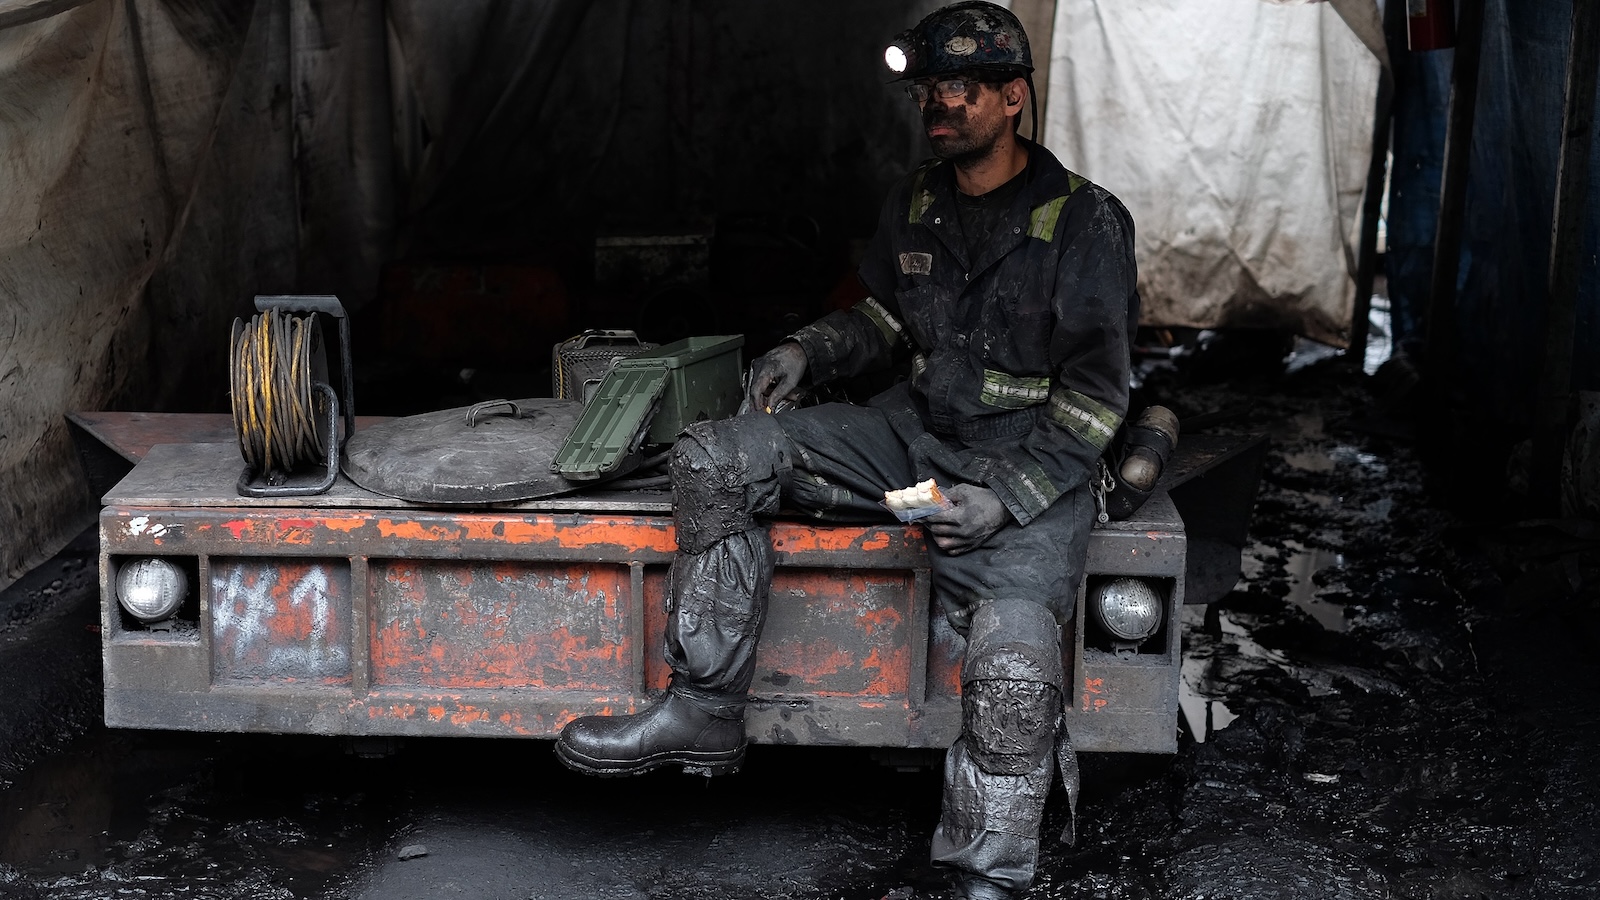 A coal miner wearing coveralls sits on a piece of mining equipment while eating his lunch.